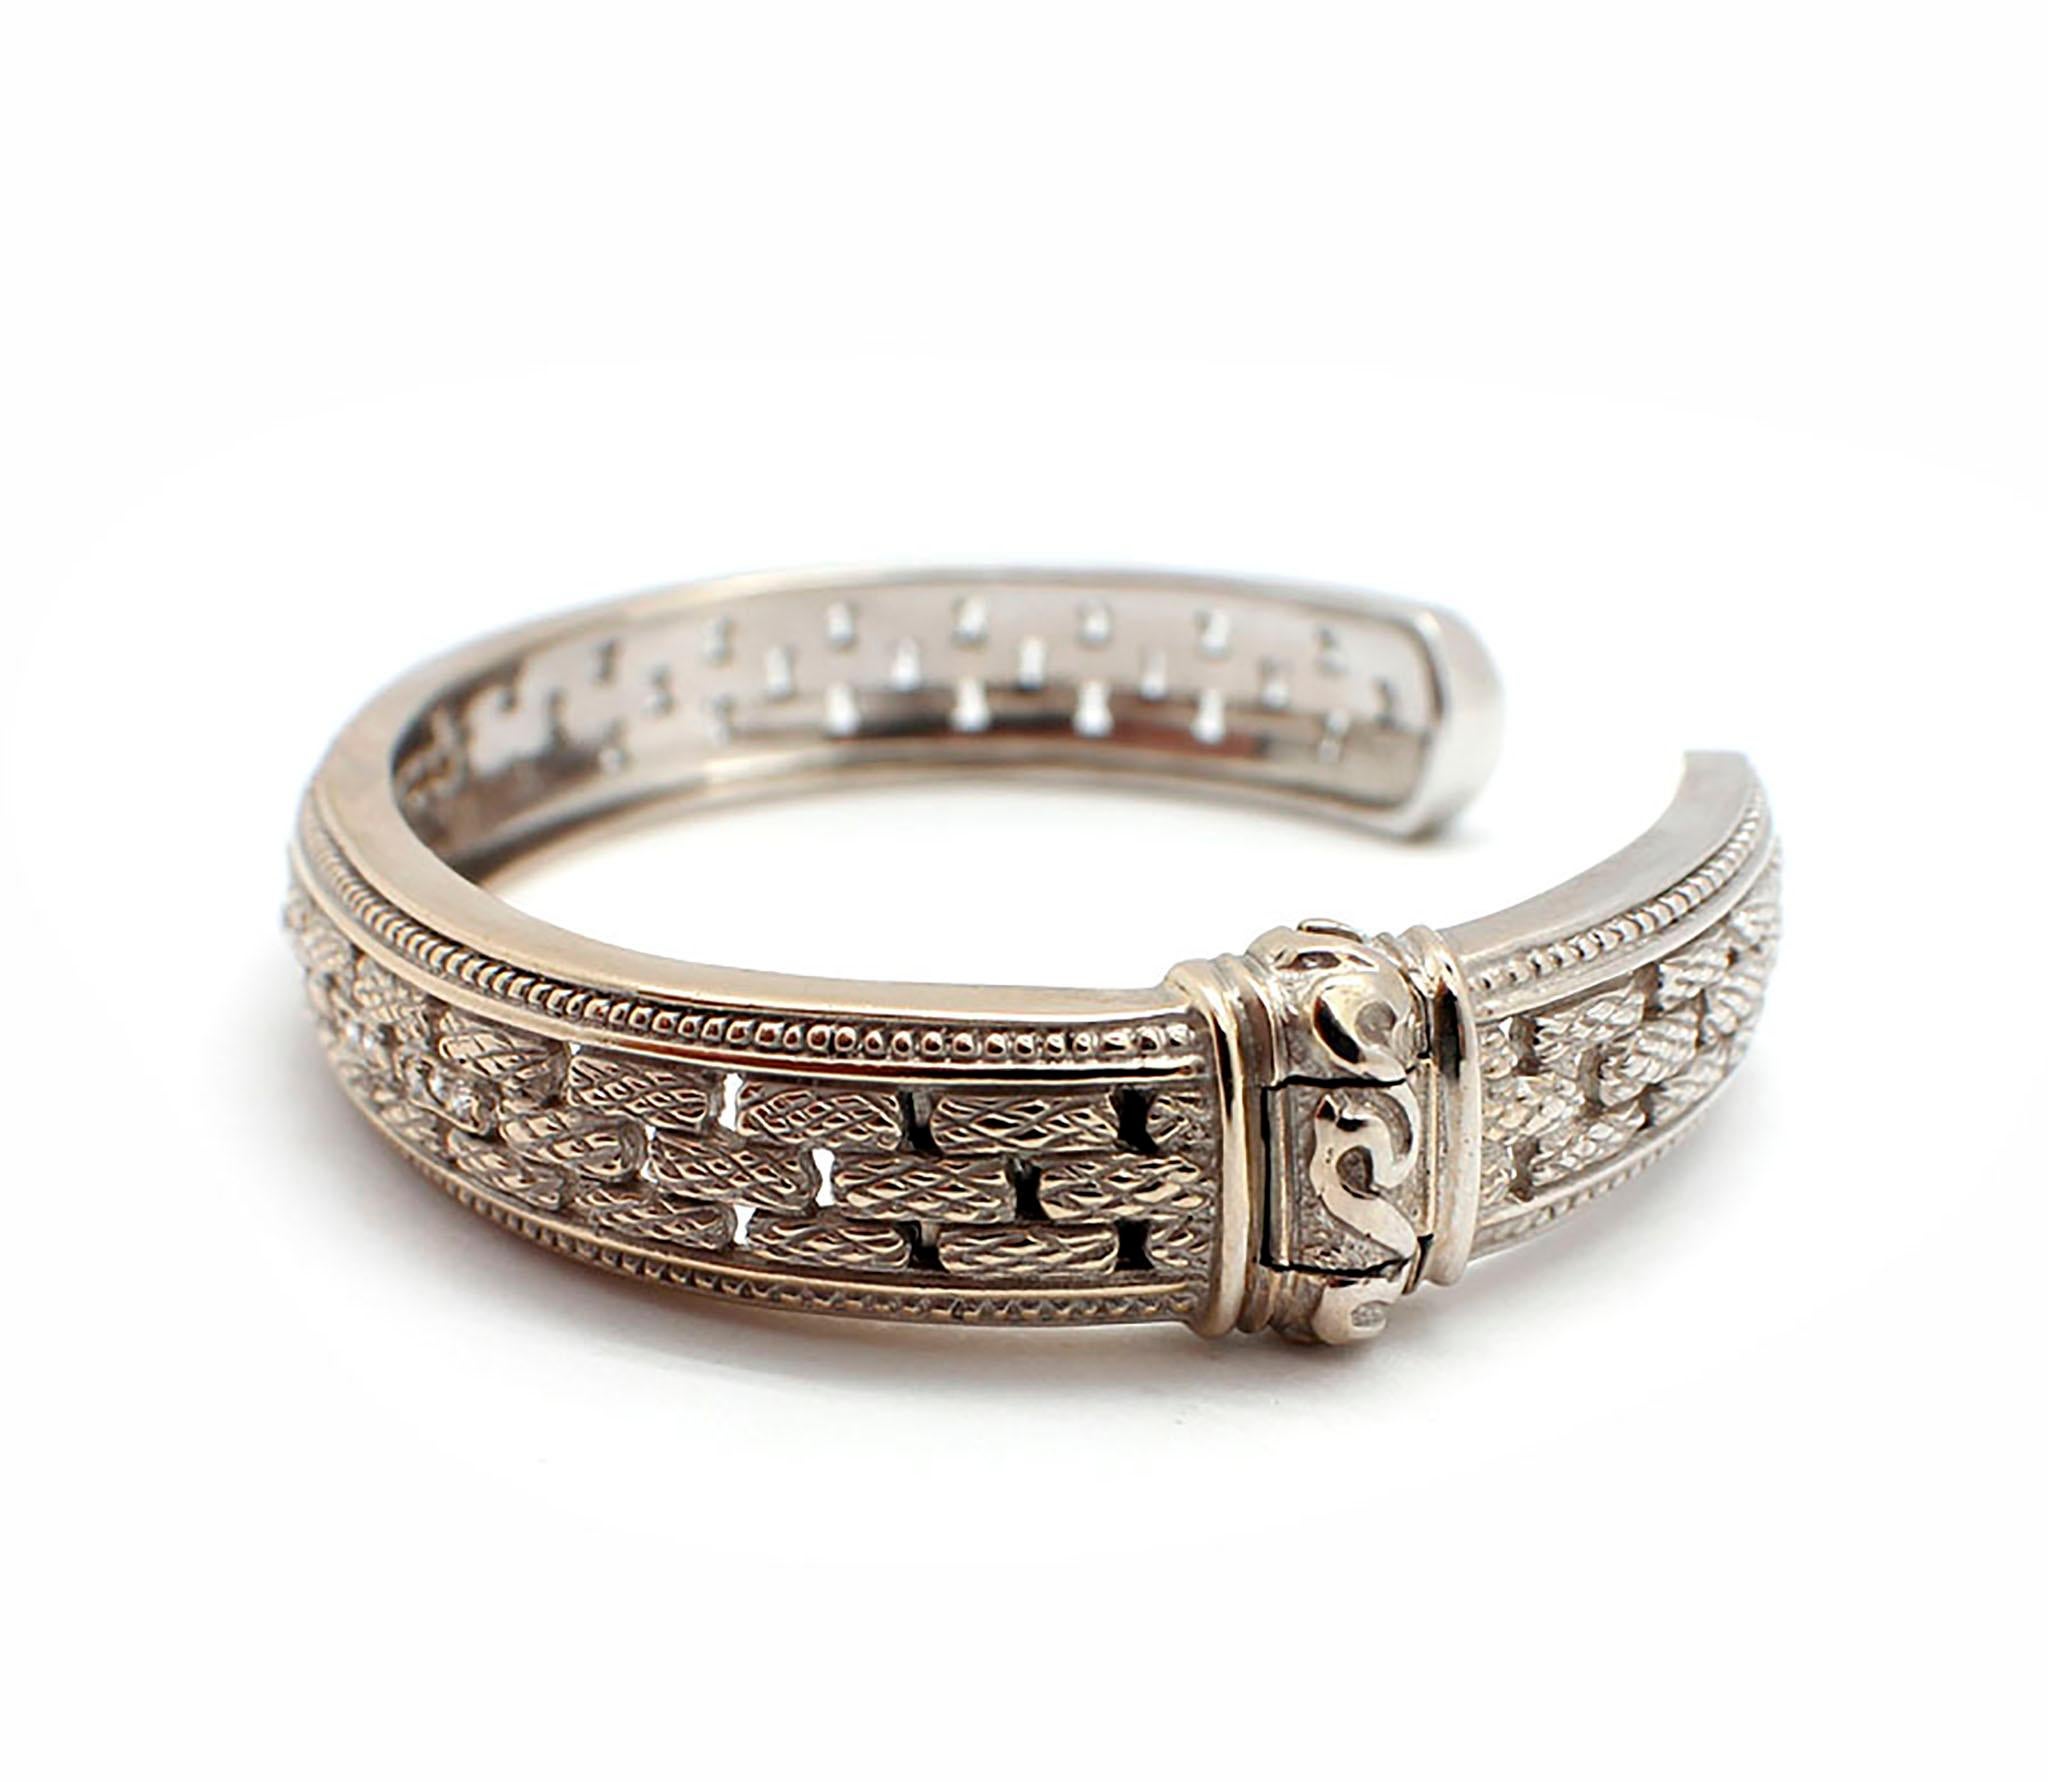 This rich Judith Ripka bangle bracelet is made of 18k white gold with a side hinge for an easy fit! The bracelet features 21 round diamond melee in sets of three down the center of the 11mm wide cuff bangle bracelet for a total diamond weight of